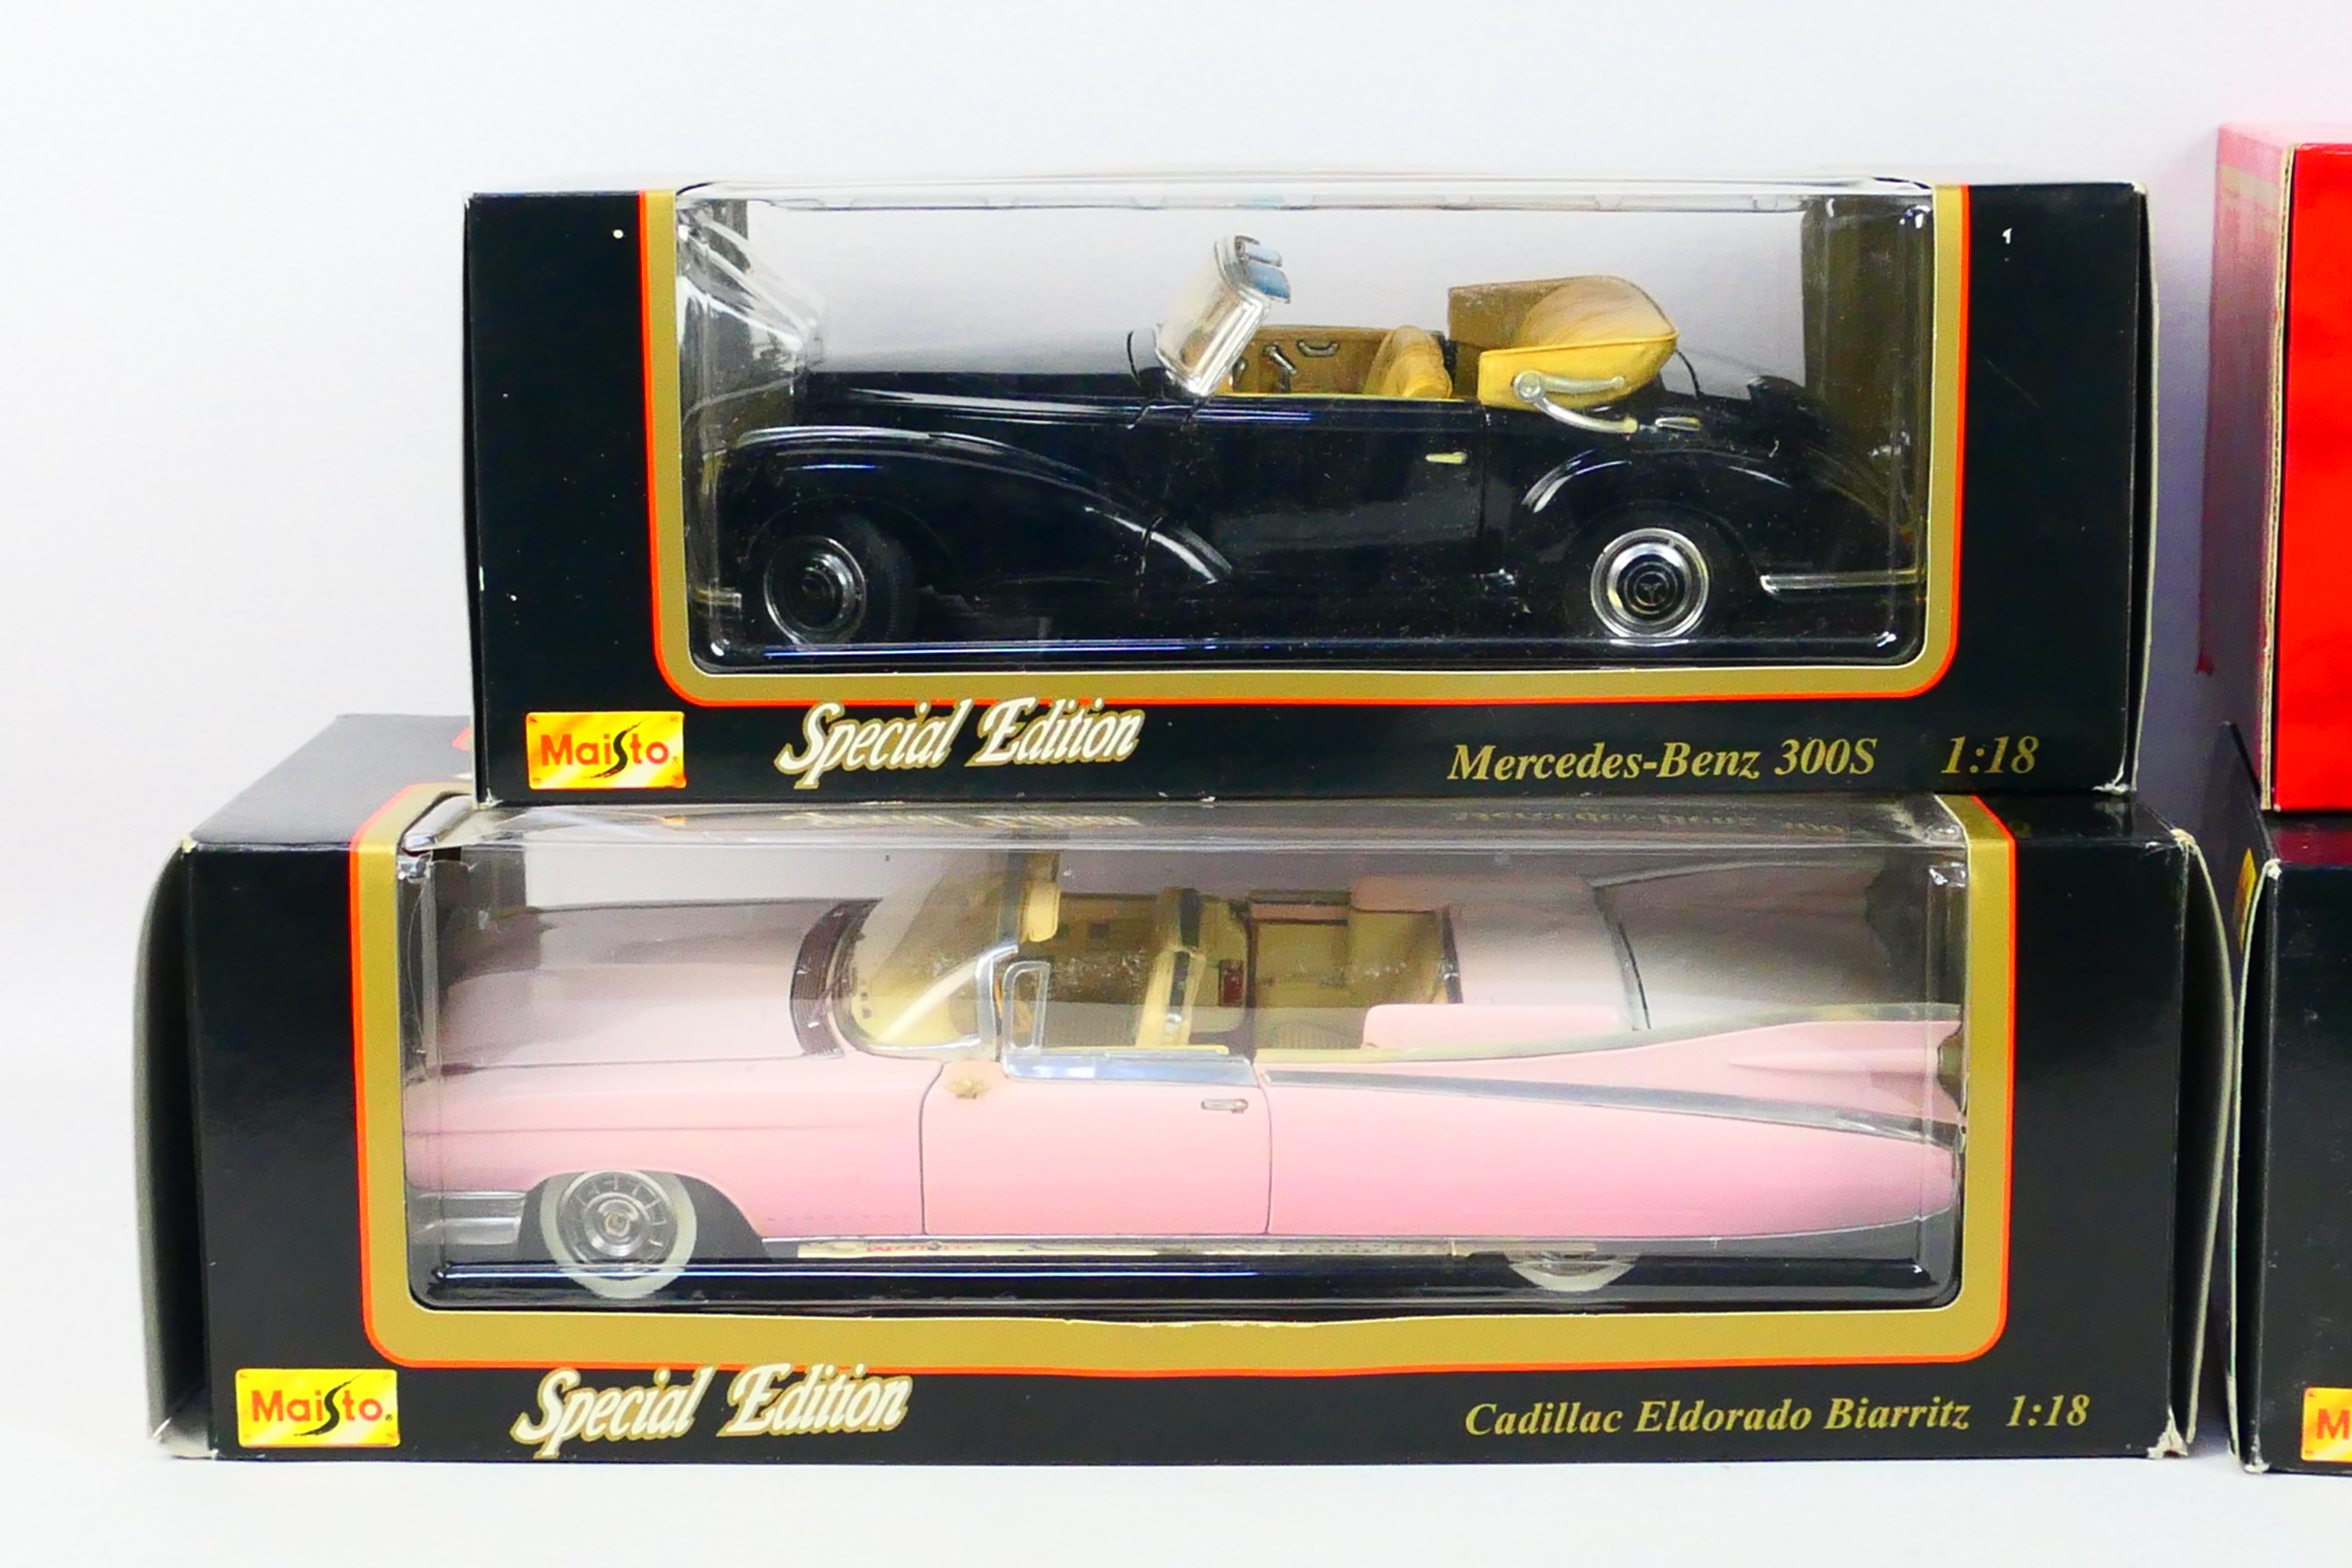 Maisto - Mira - Four boxed diecast 1:18 scale model cars. - Image 2 of 3